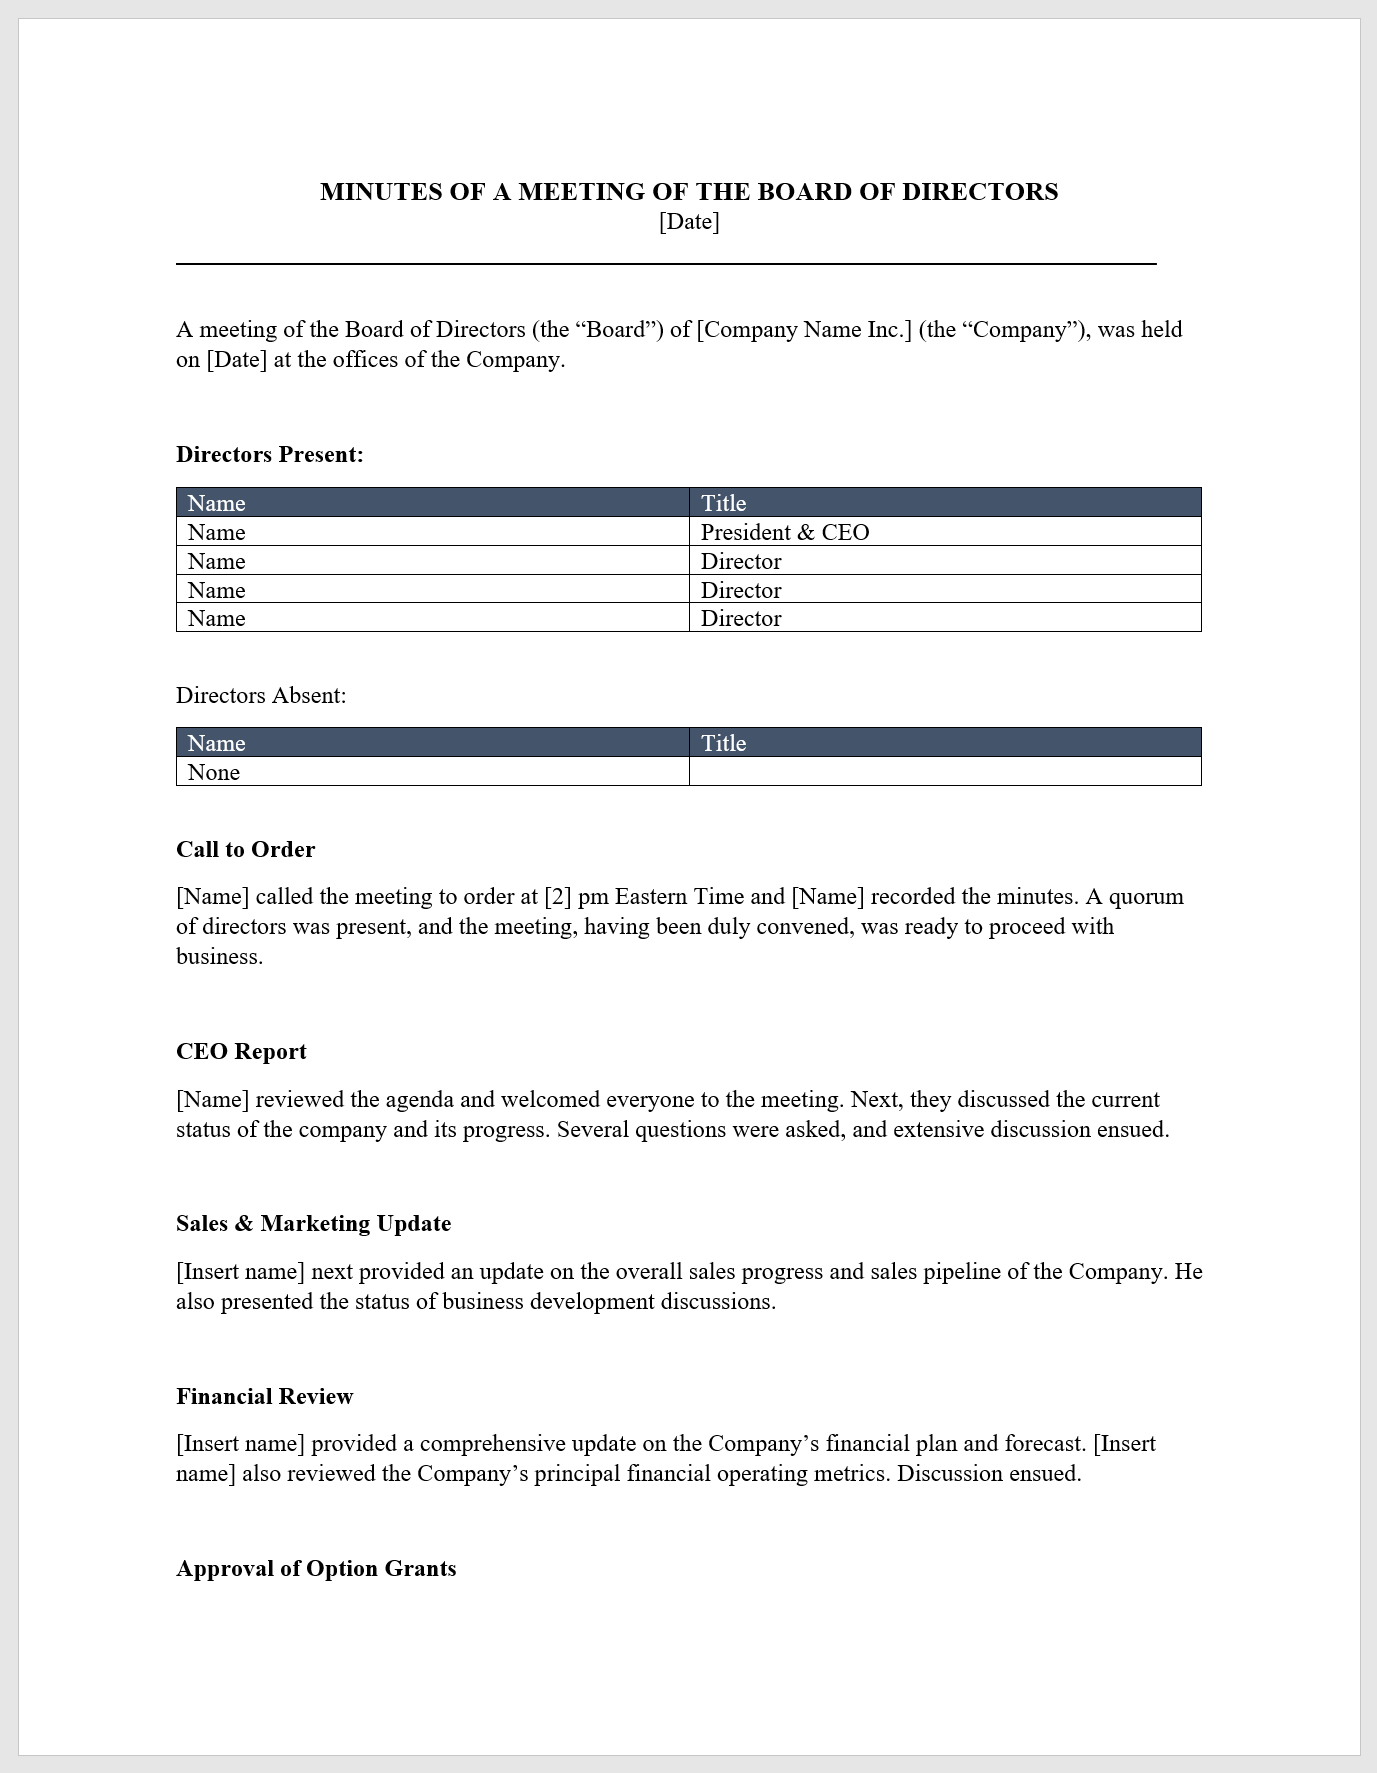 Board Meeting Minutes Template Download From Cfi Marketplace for dimensions 1377 X 1773